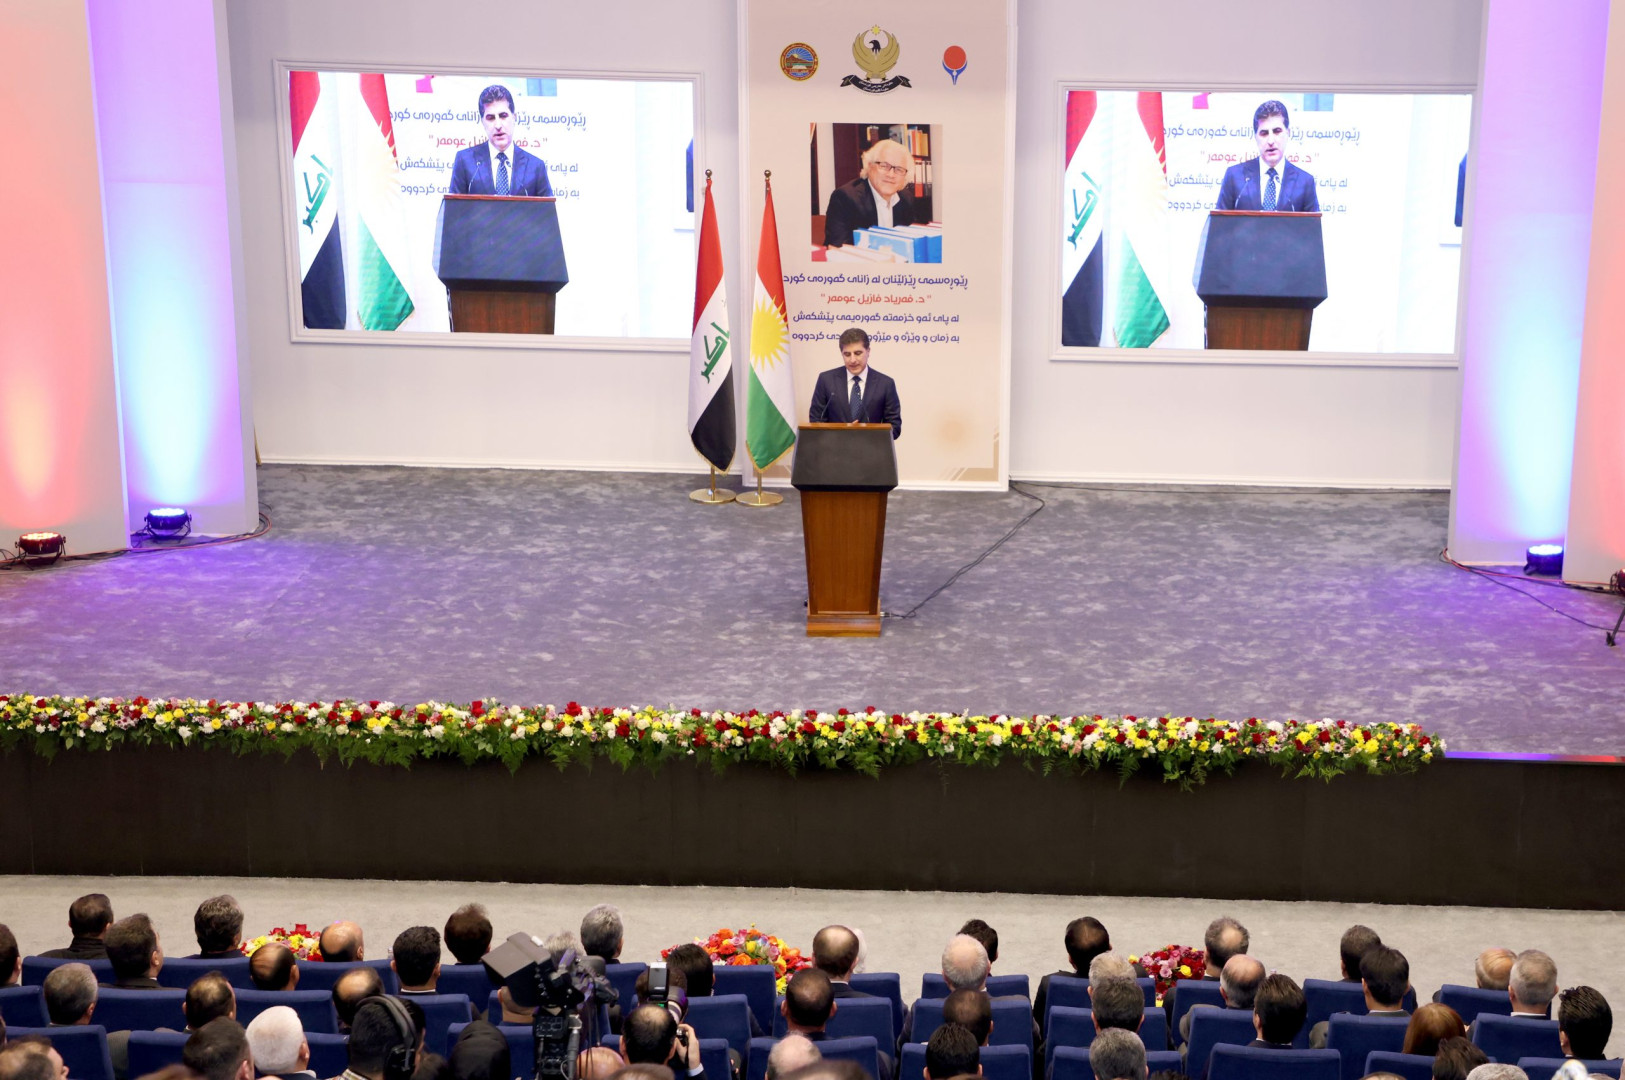 President Barzani: intellectuals should rectify the "incomplete image" orientalists depicted about the Kurds